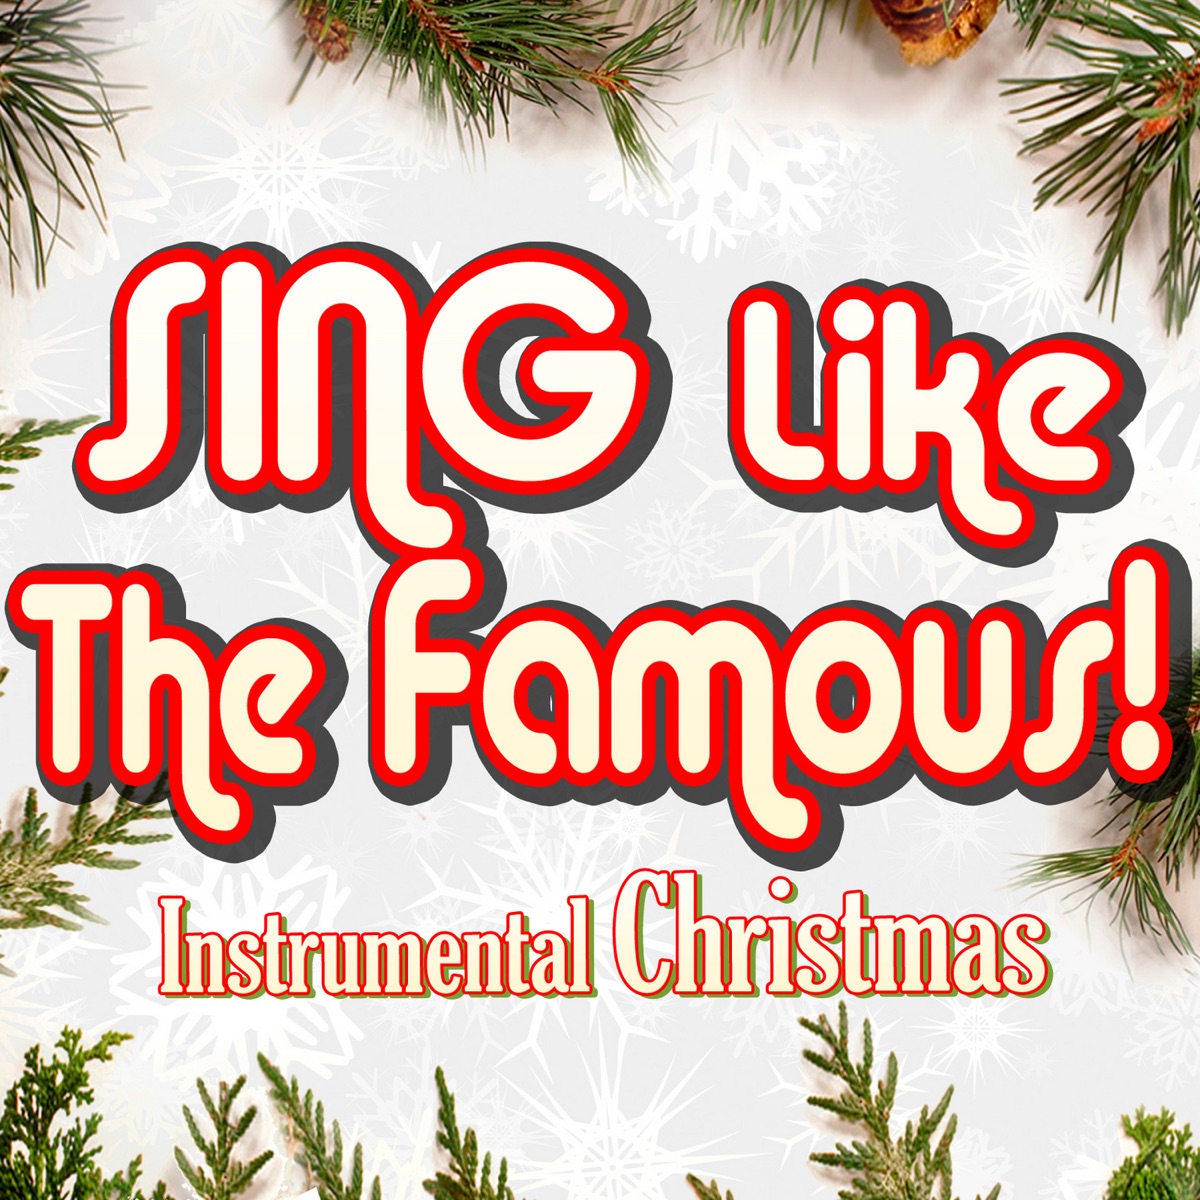 Jingle Bell Rock (Instrumental Christmas Karaoke) [Originally Performed by  the Glee Cast] - Single by Sing Like The Famous! on Apple Music